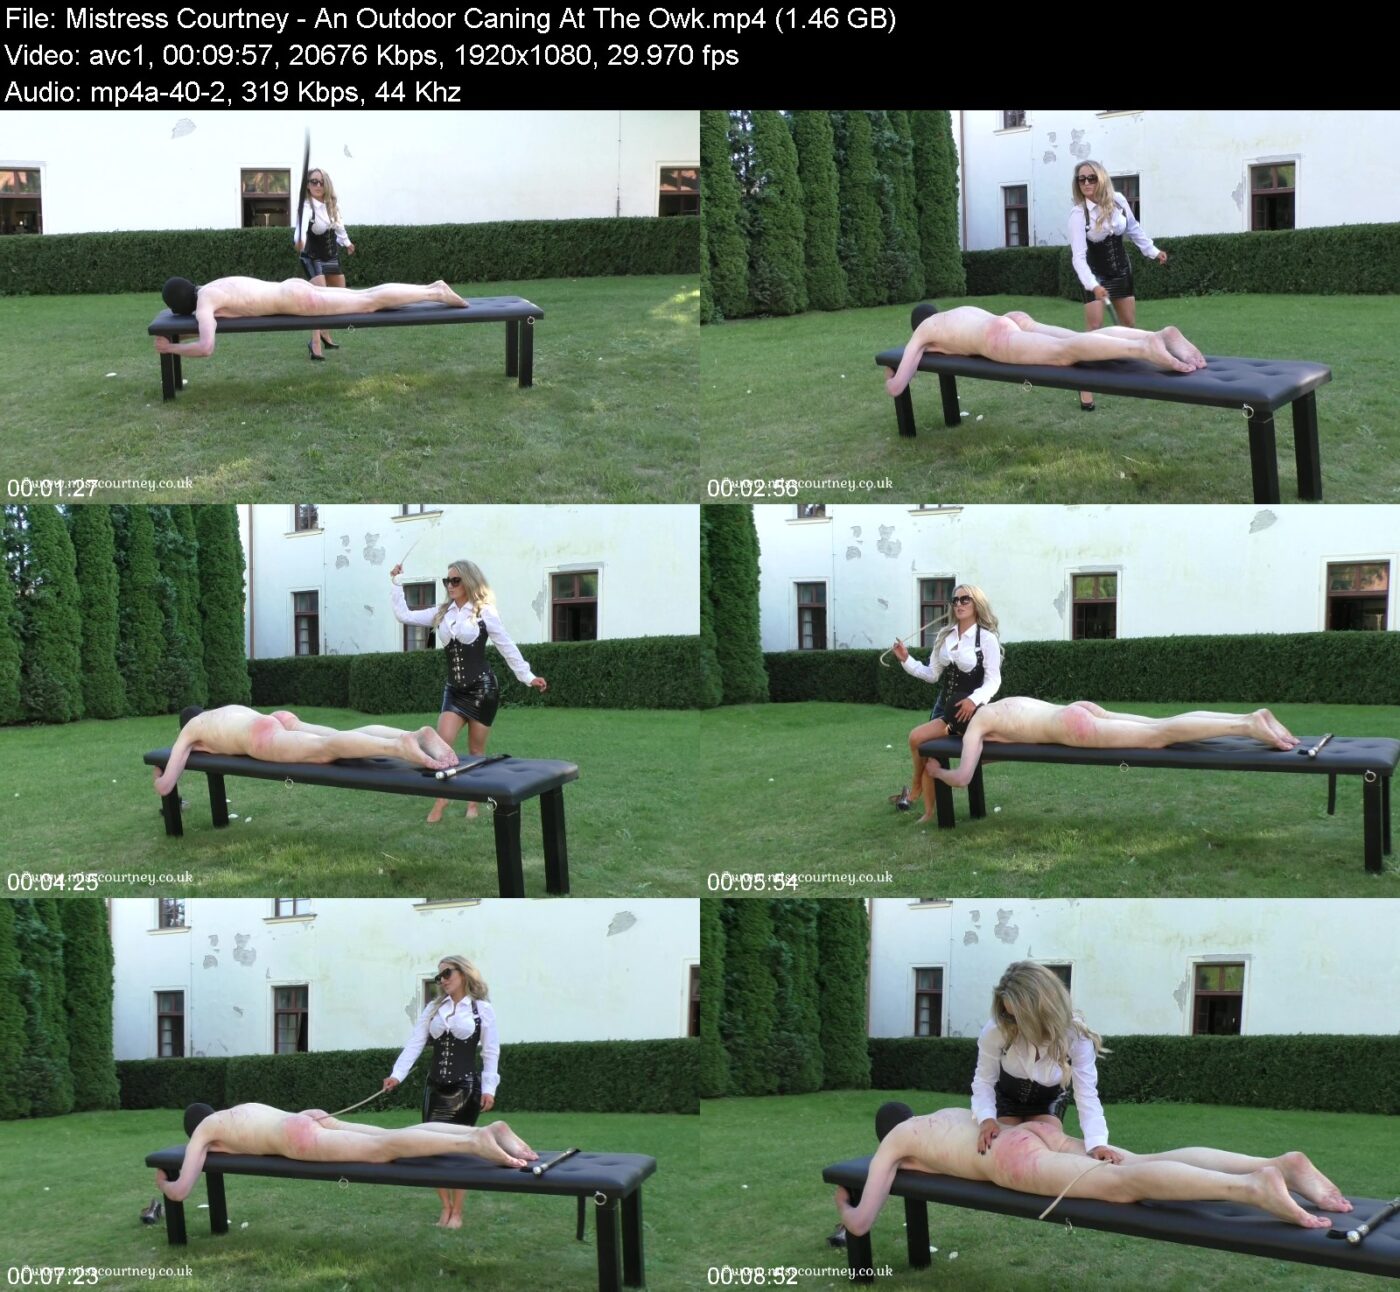 Actress: Mistress Courtney. Title and Studio: An Outdoor Caning At The Owk